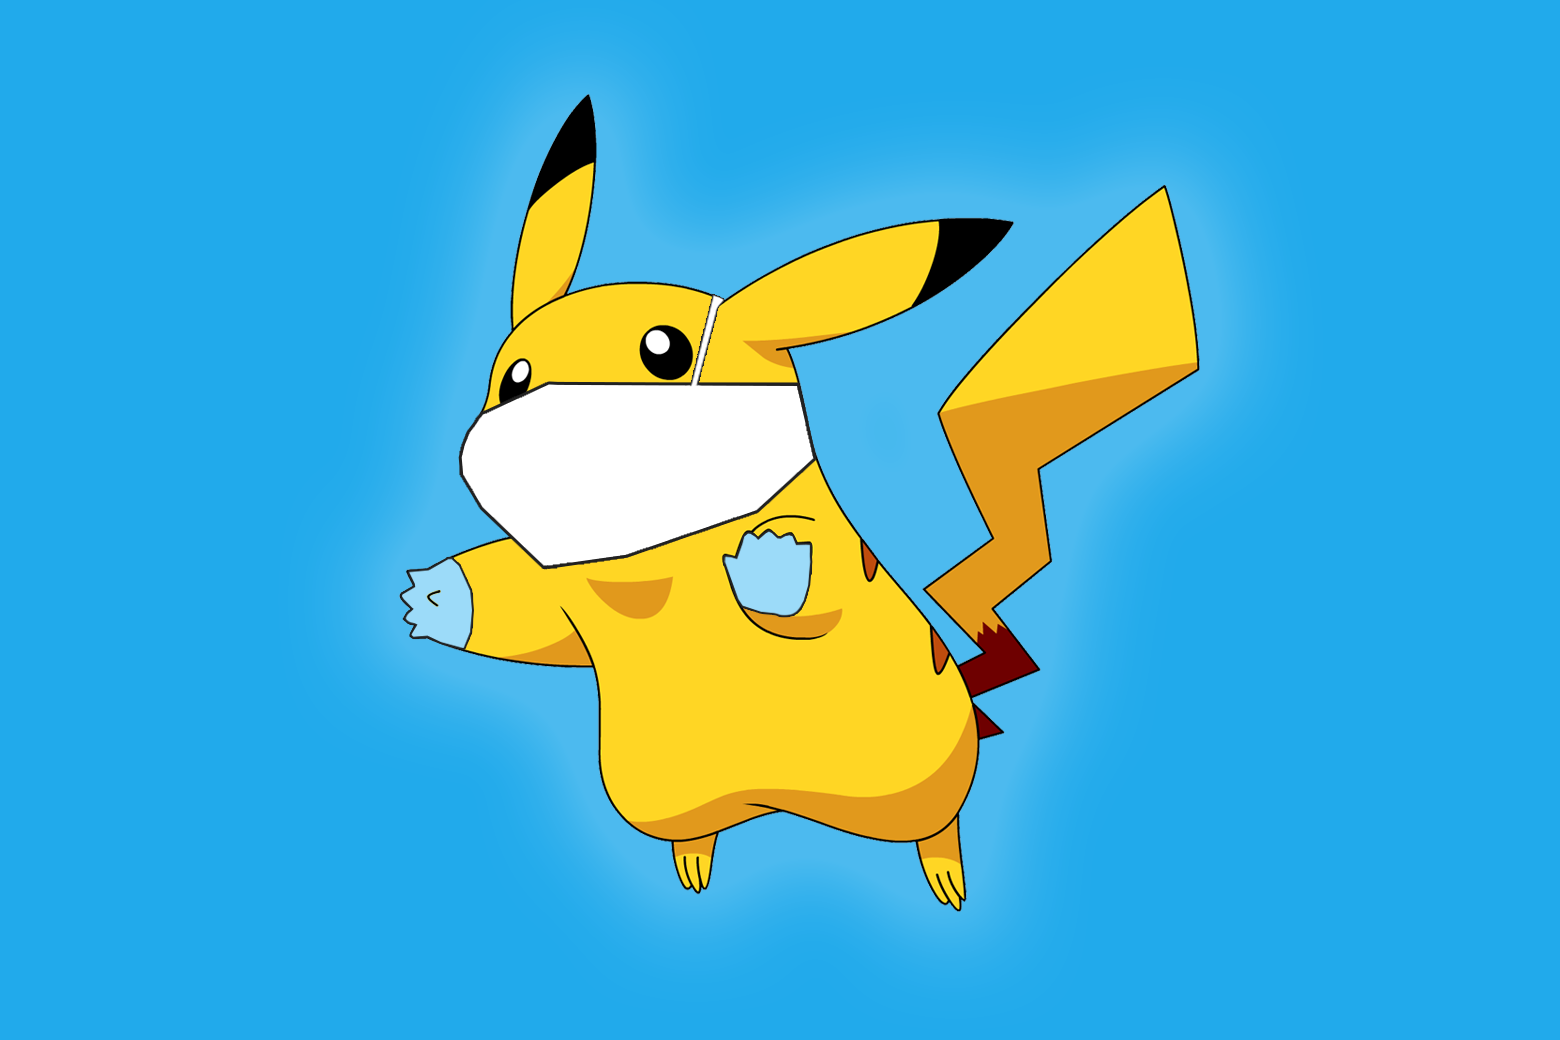 Pikachu leaps forth, wearing a surgical mask and gloves